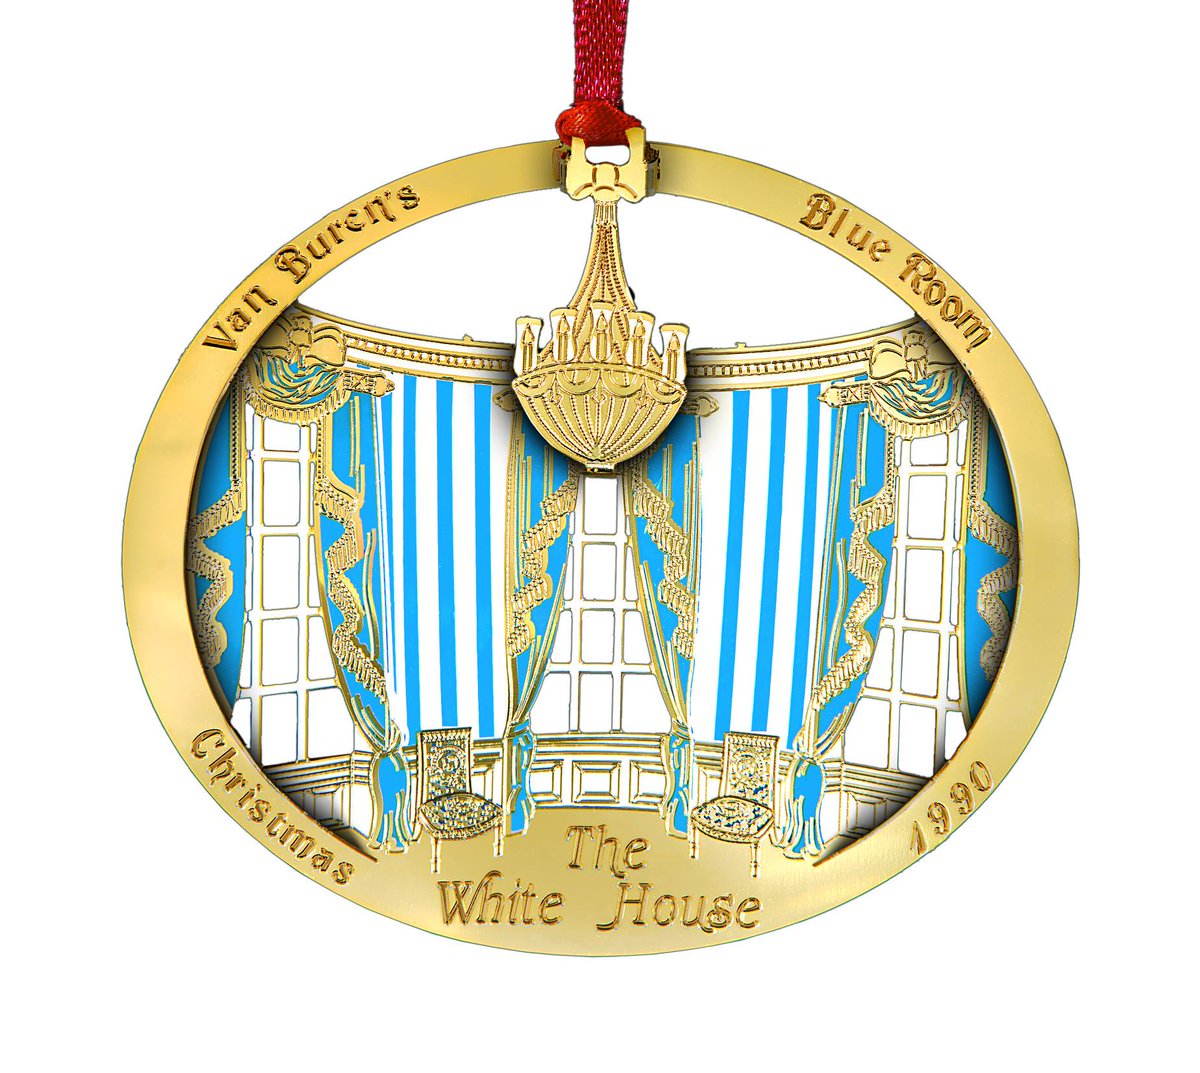 The 1990 ornament honors President Martin Van Buren. He installed central heating to the White House's main rooms and ordered the central parlors redecorated. Van Buren wanted the oval room to be blue and it has been the Blue Room ever since. https://shop.whitehousehistory.org/holidays/ornaments/1990-1993-four-white-hour-ornaments-sold-as-a-set